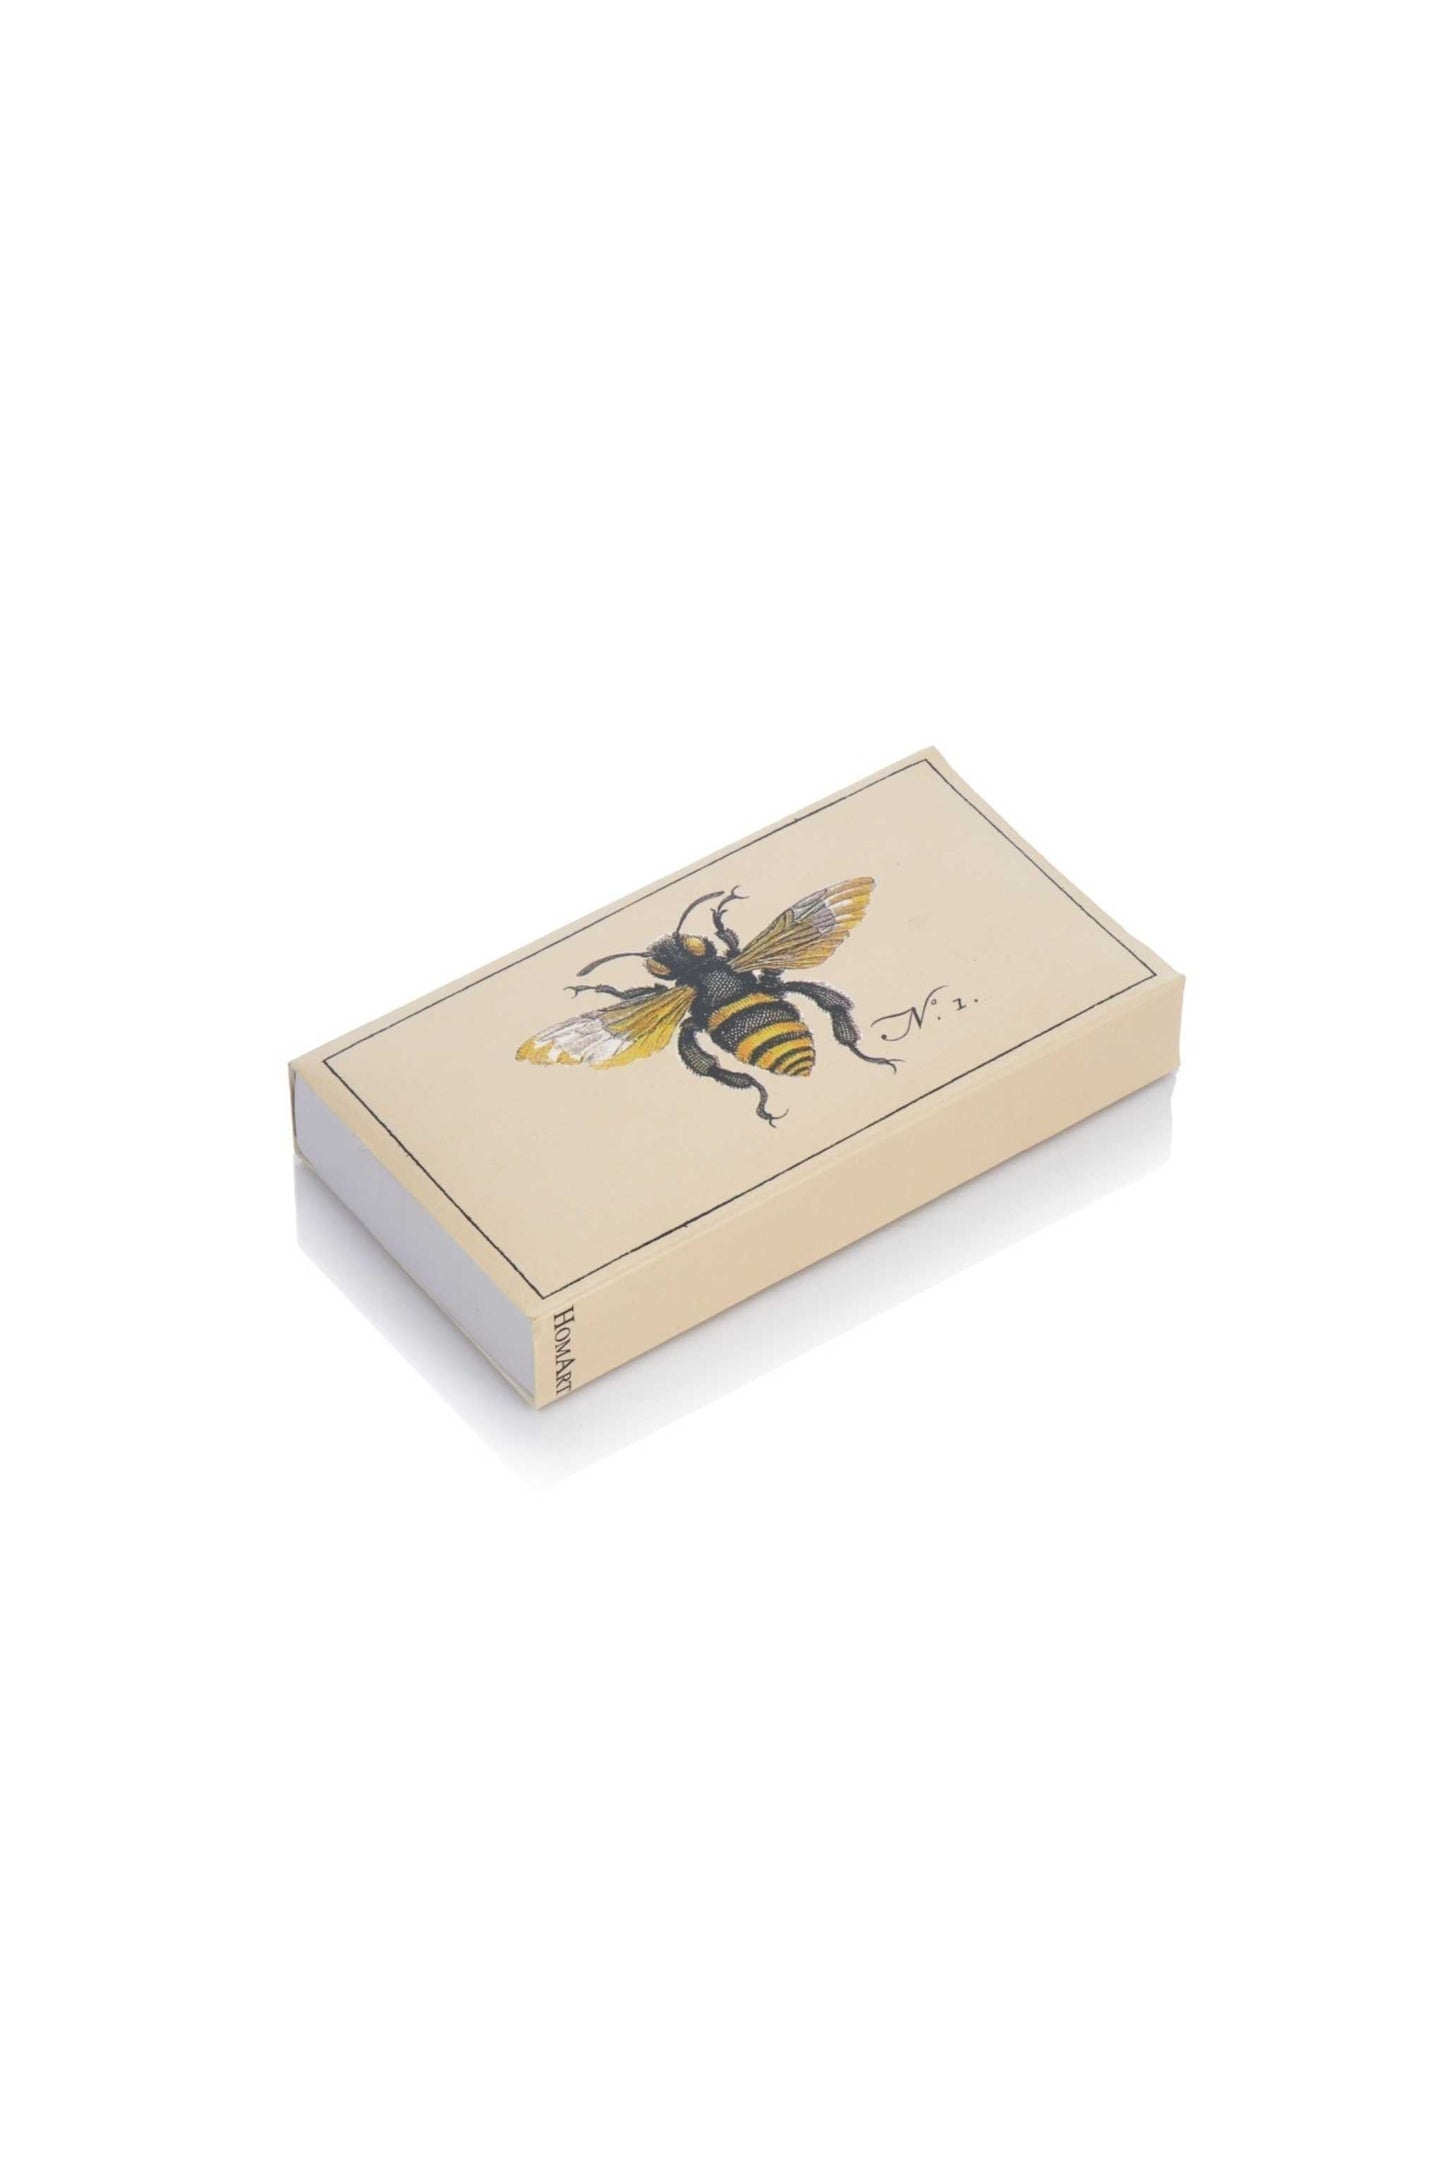 Cream wooden matches in a Cream matchbox with a black and yellow honeybee illustration.